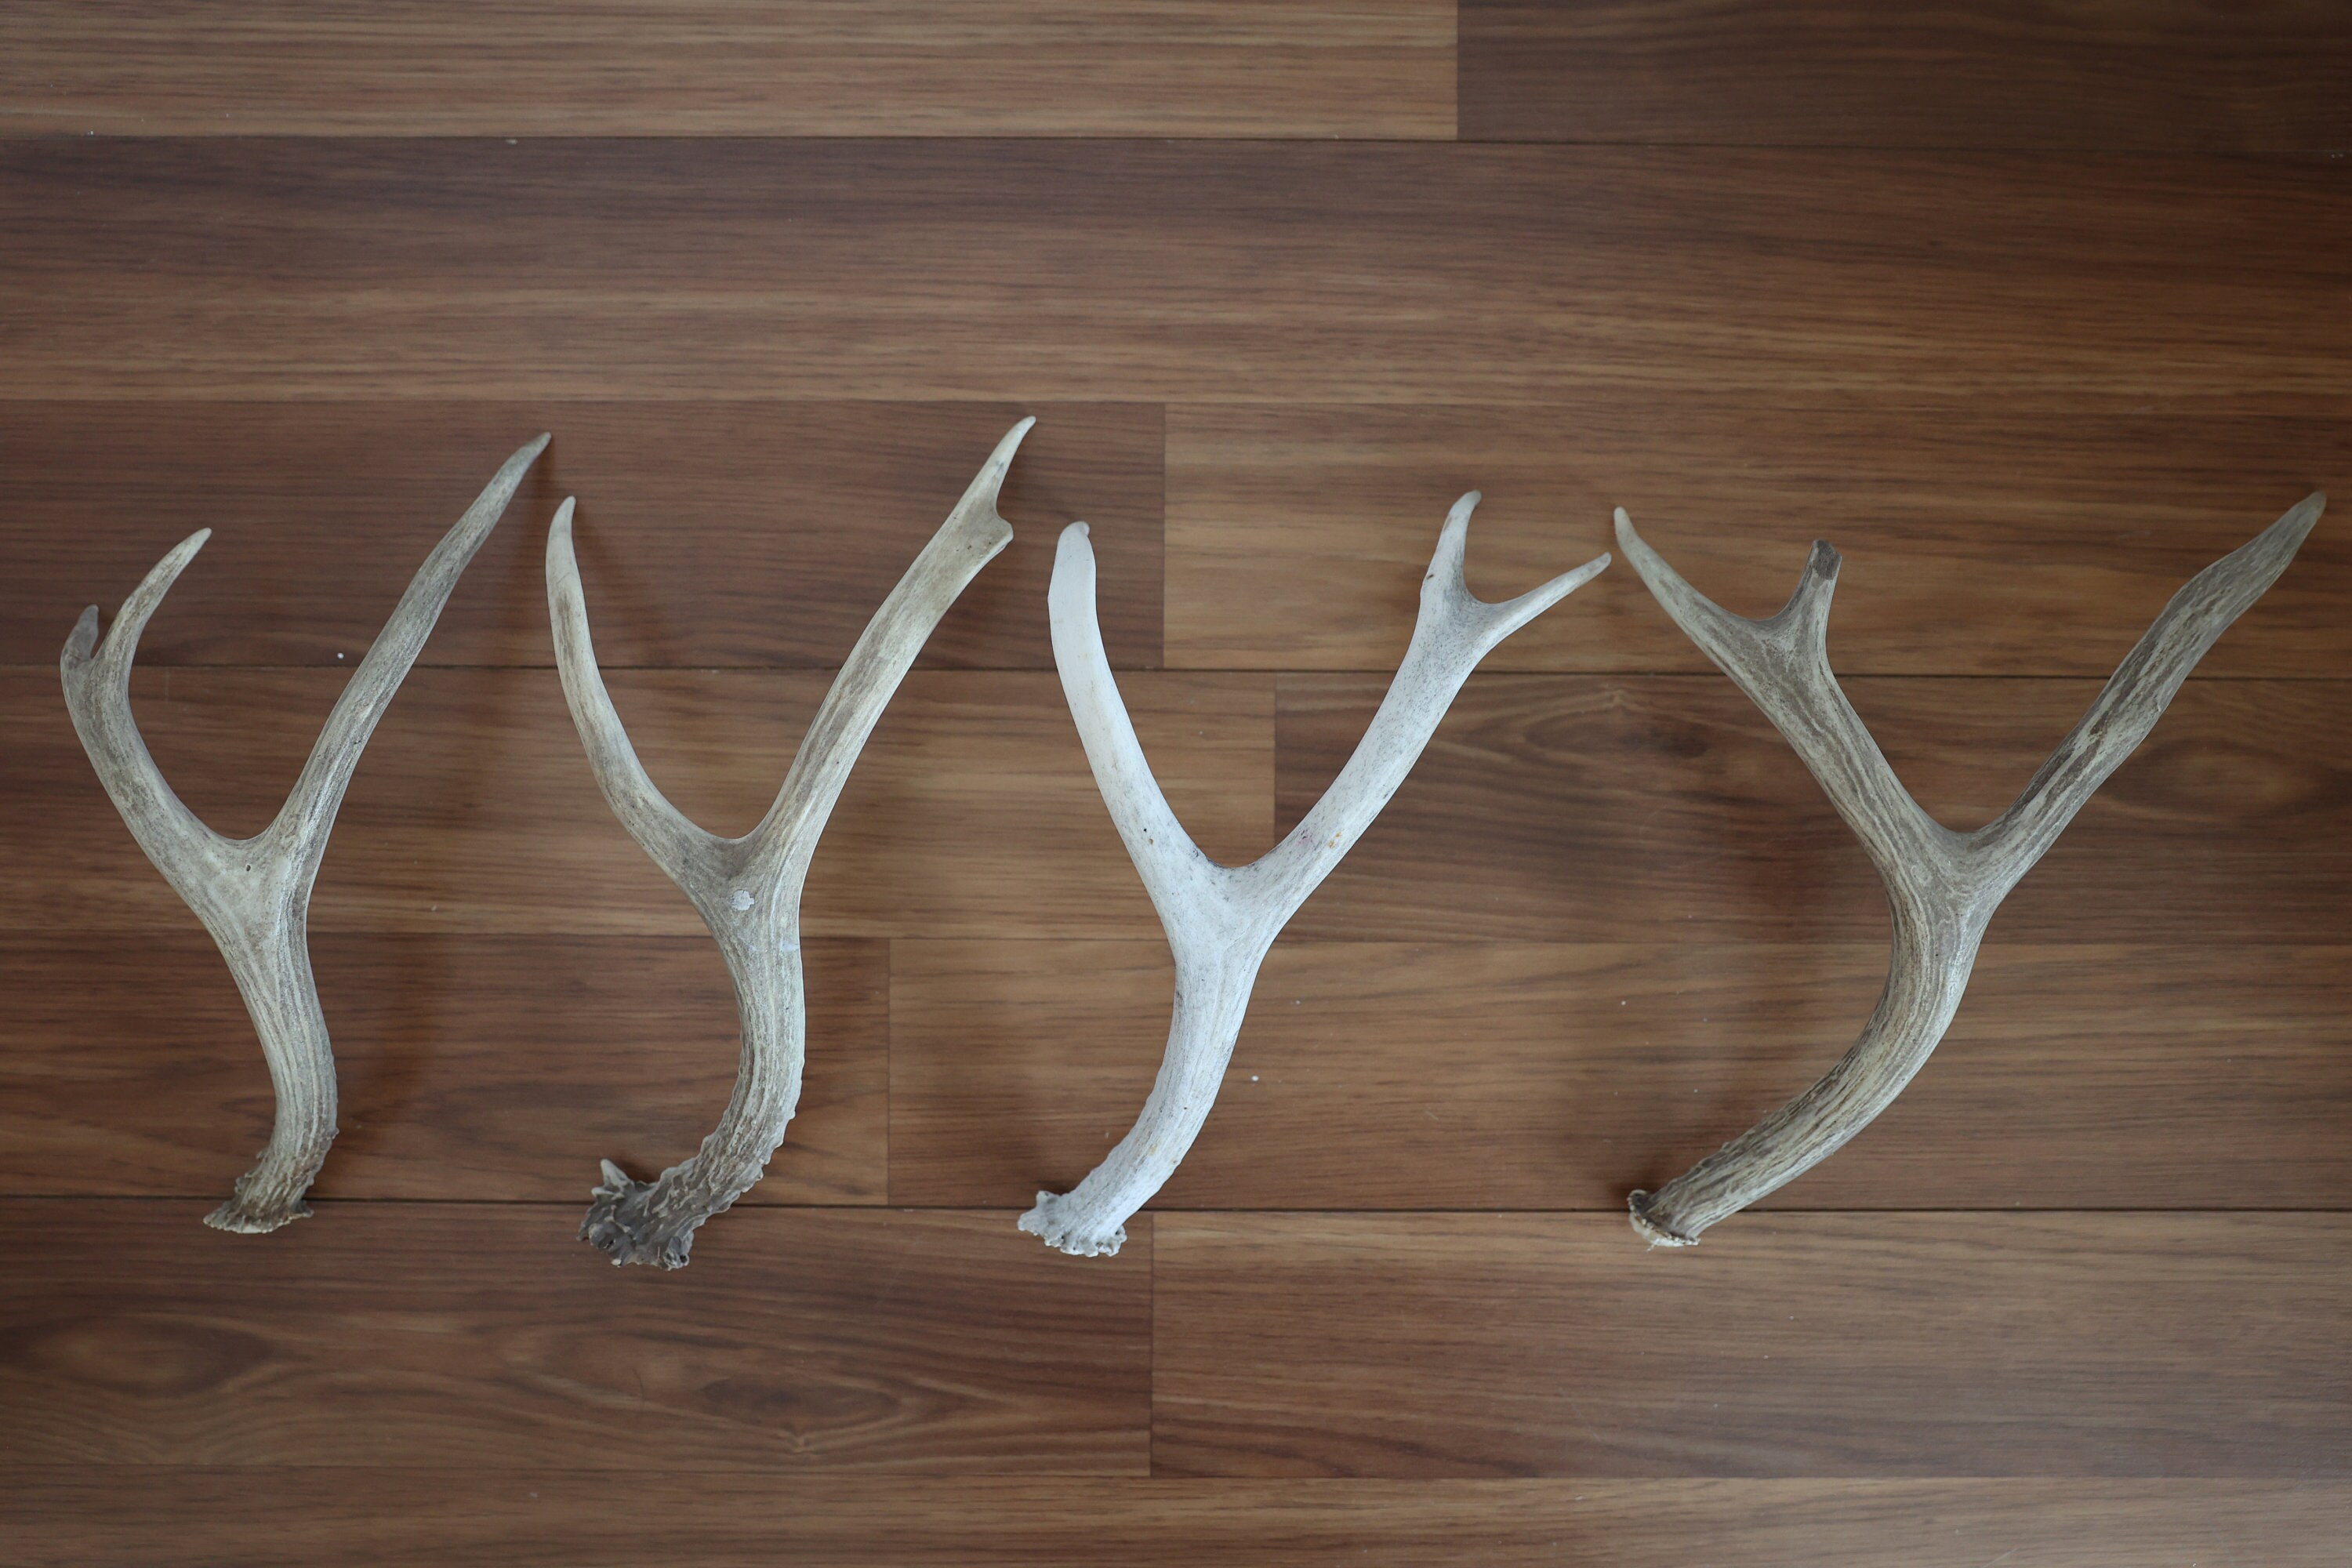 Gathered 3 Point White Tail Deer Antler Rack by BCI Crafts